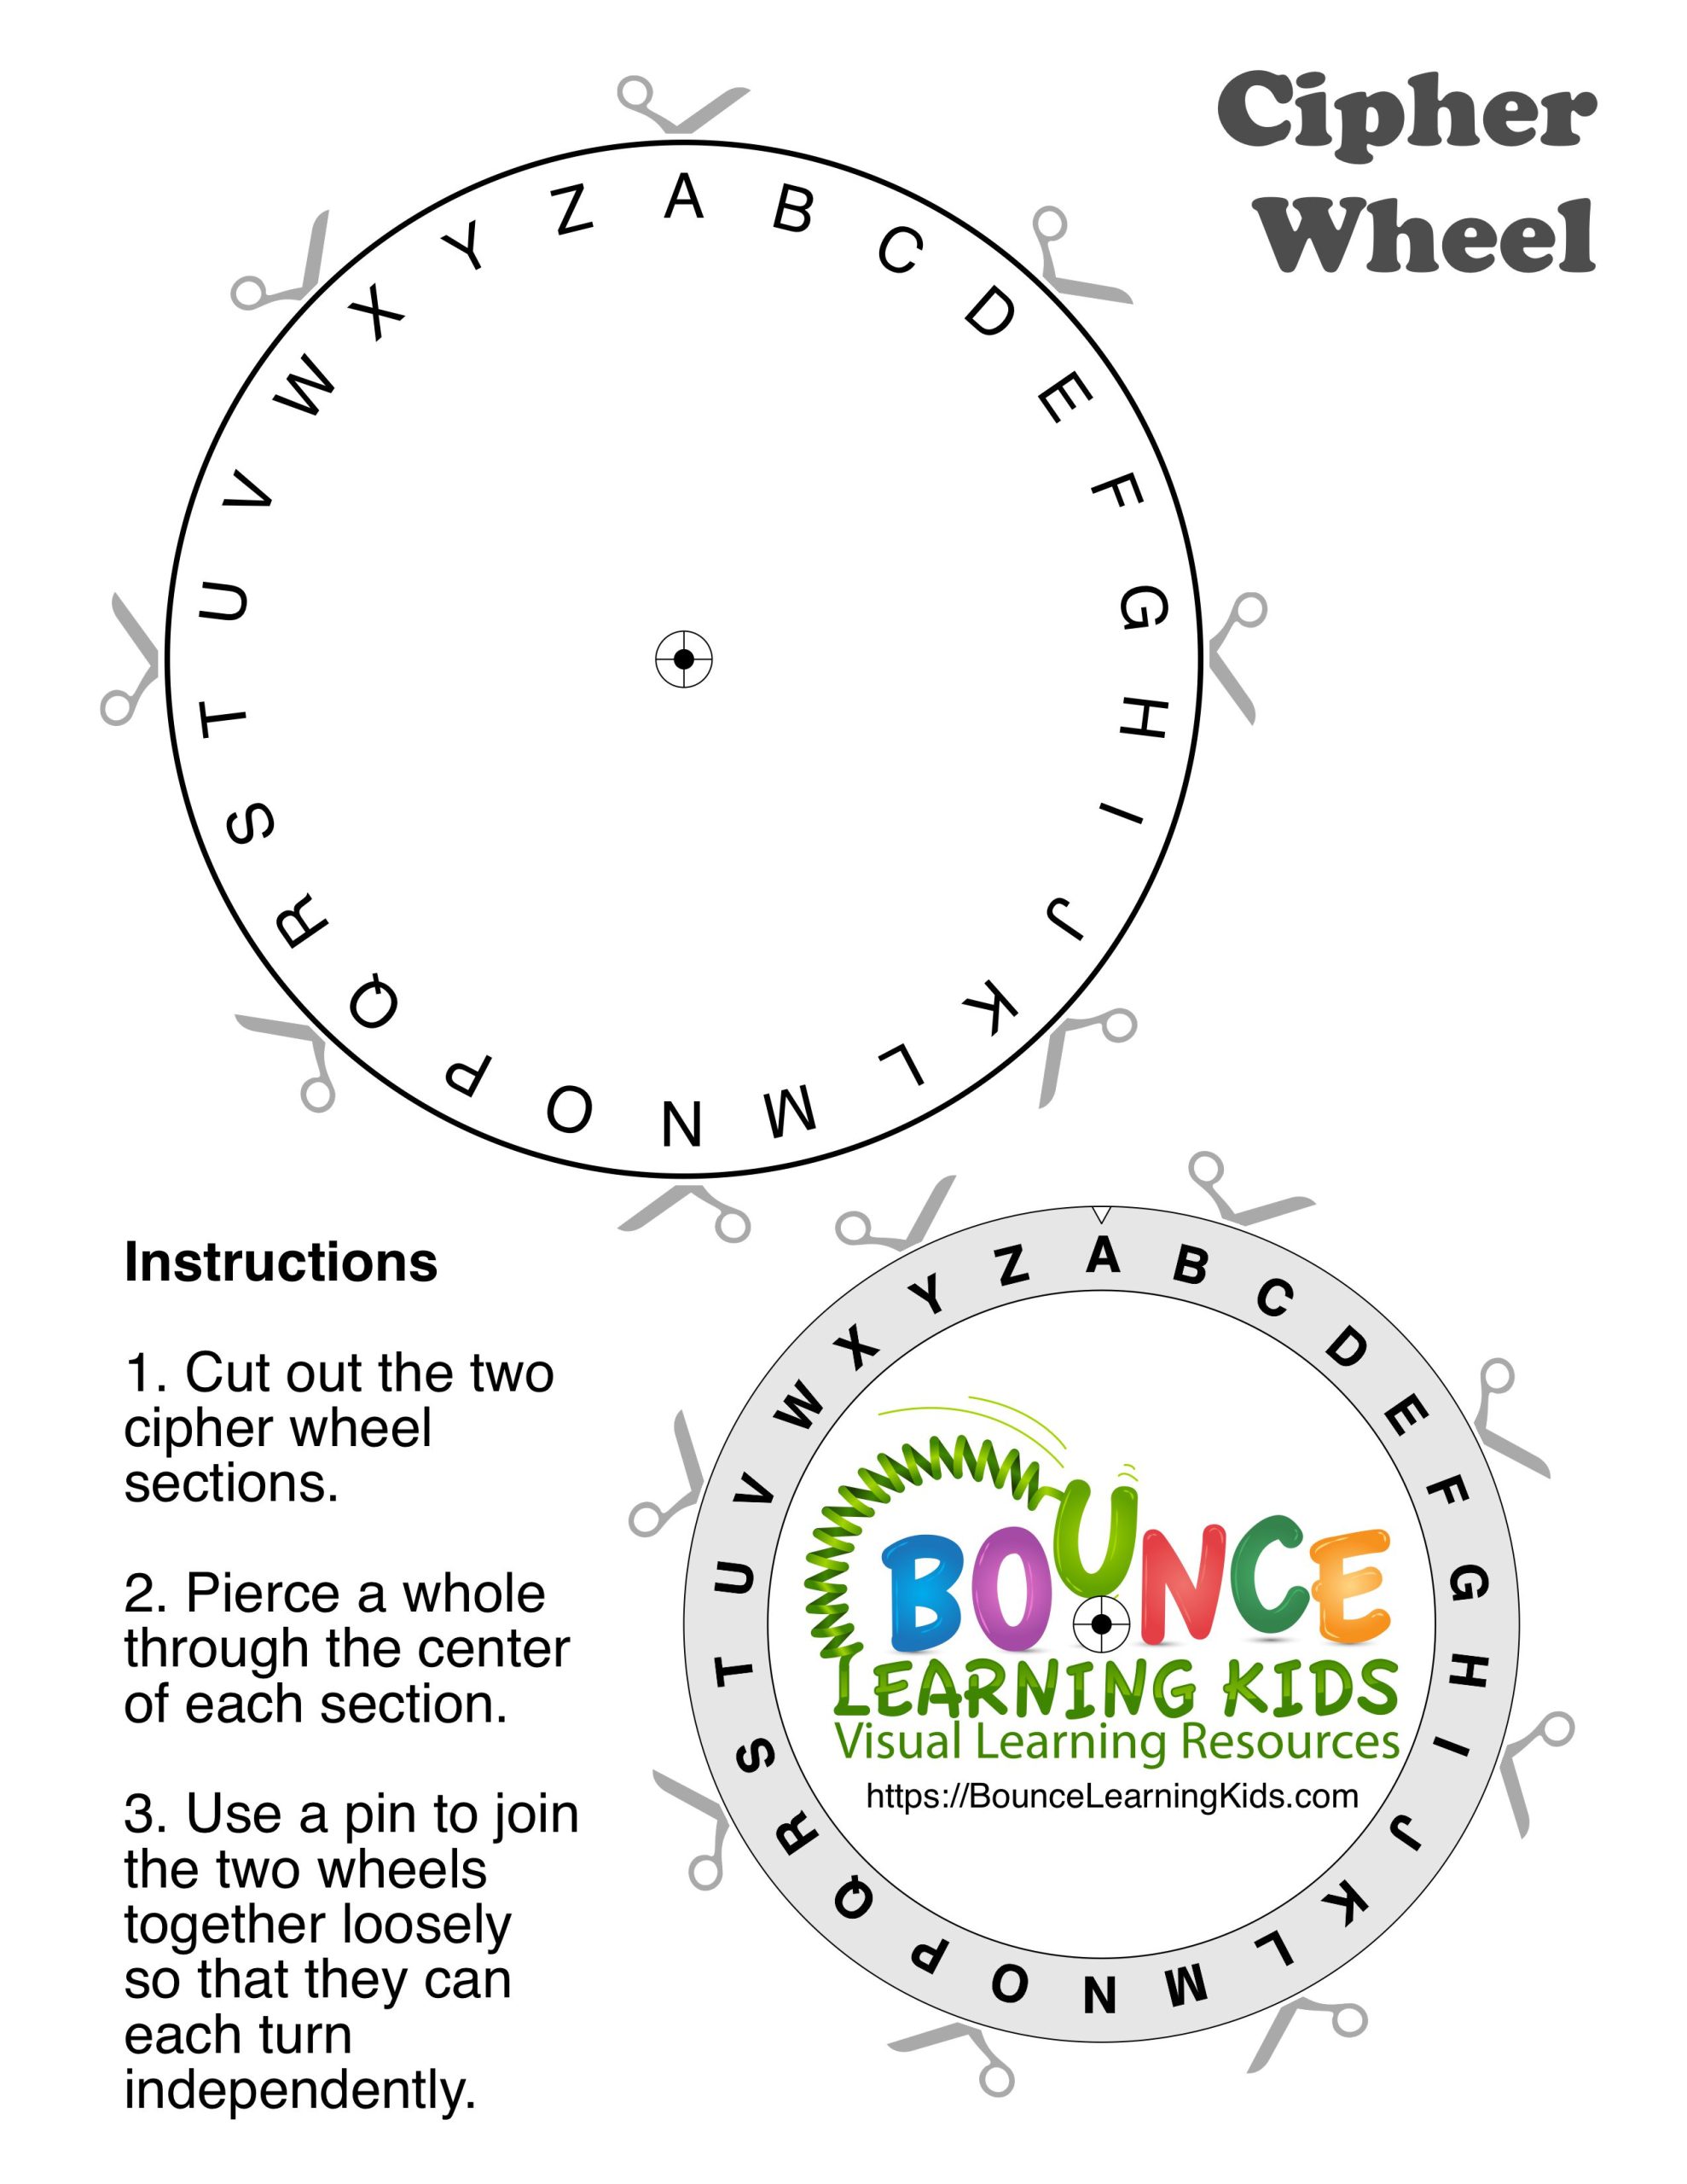 downloadable-cipher-wheel-template-bounce-learning-kids